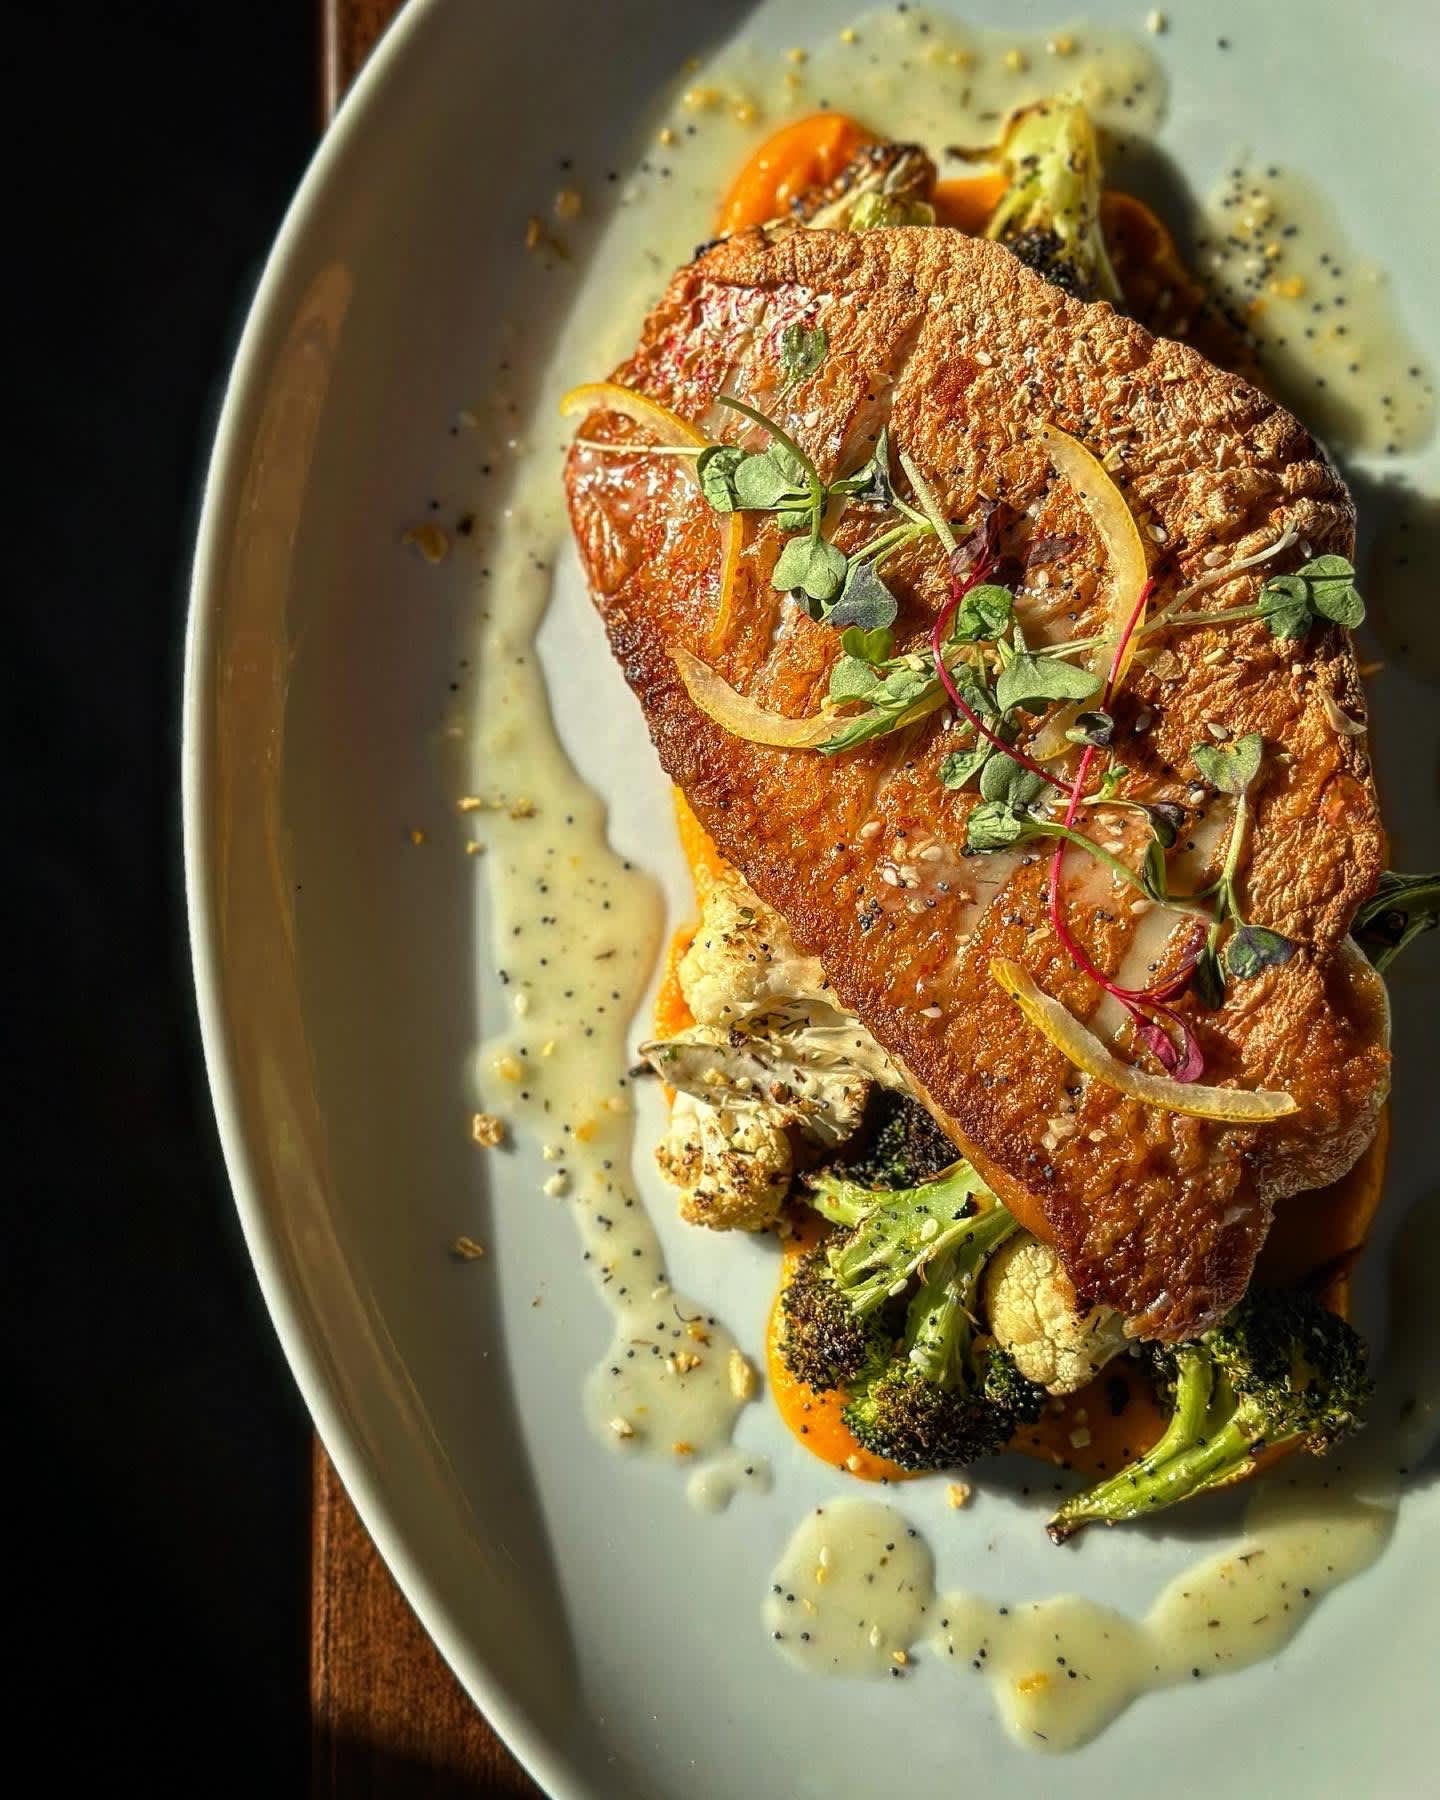 Spring Menus Are Here!

FEATURING
Pan Roasted Red Snapper 
Whipped Heirloom Carrot, Charred Broccoli & Cauliflower, "Everything Bagel Spice", Preserved Lemon Vinaigrette